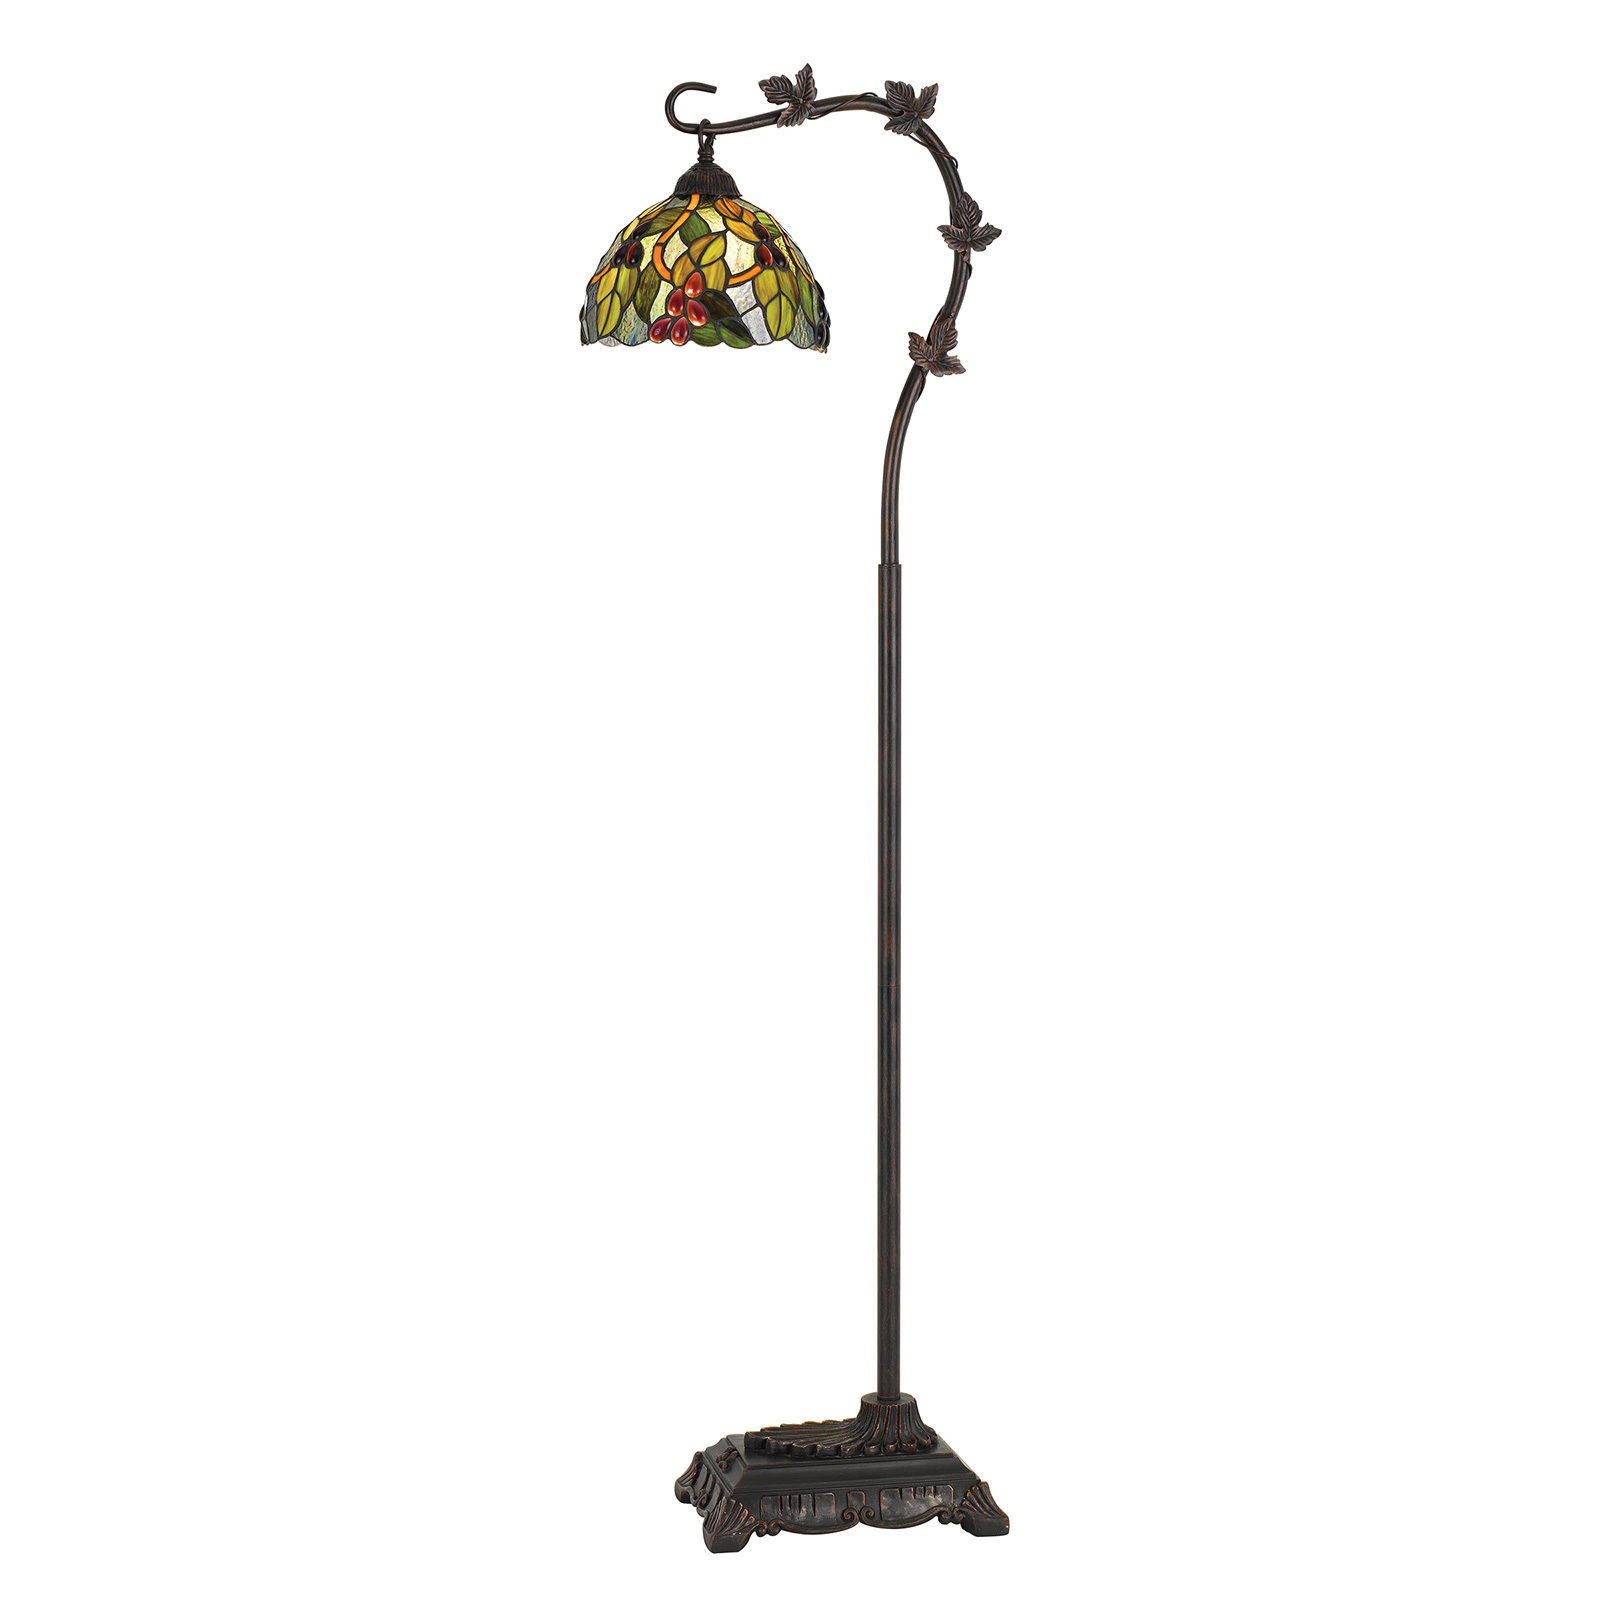 Cal Lighting :: Products :: Lamps :: Floor Lamps :: BO-2754FL